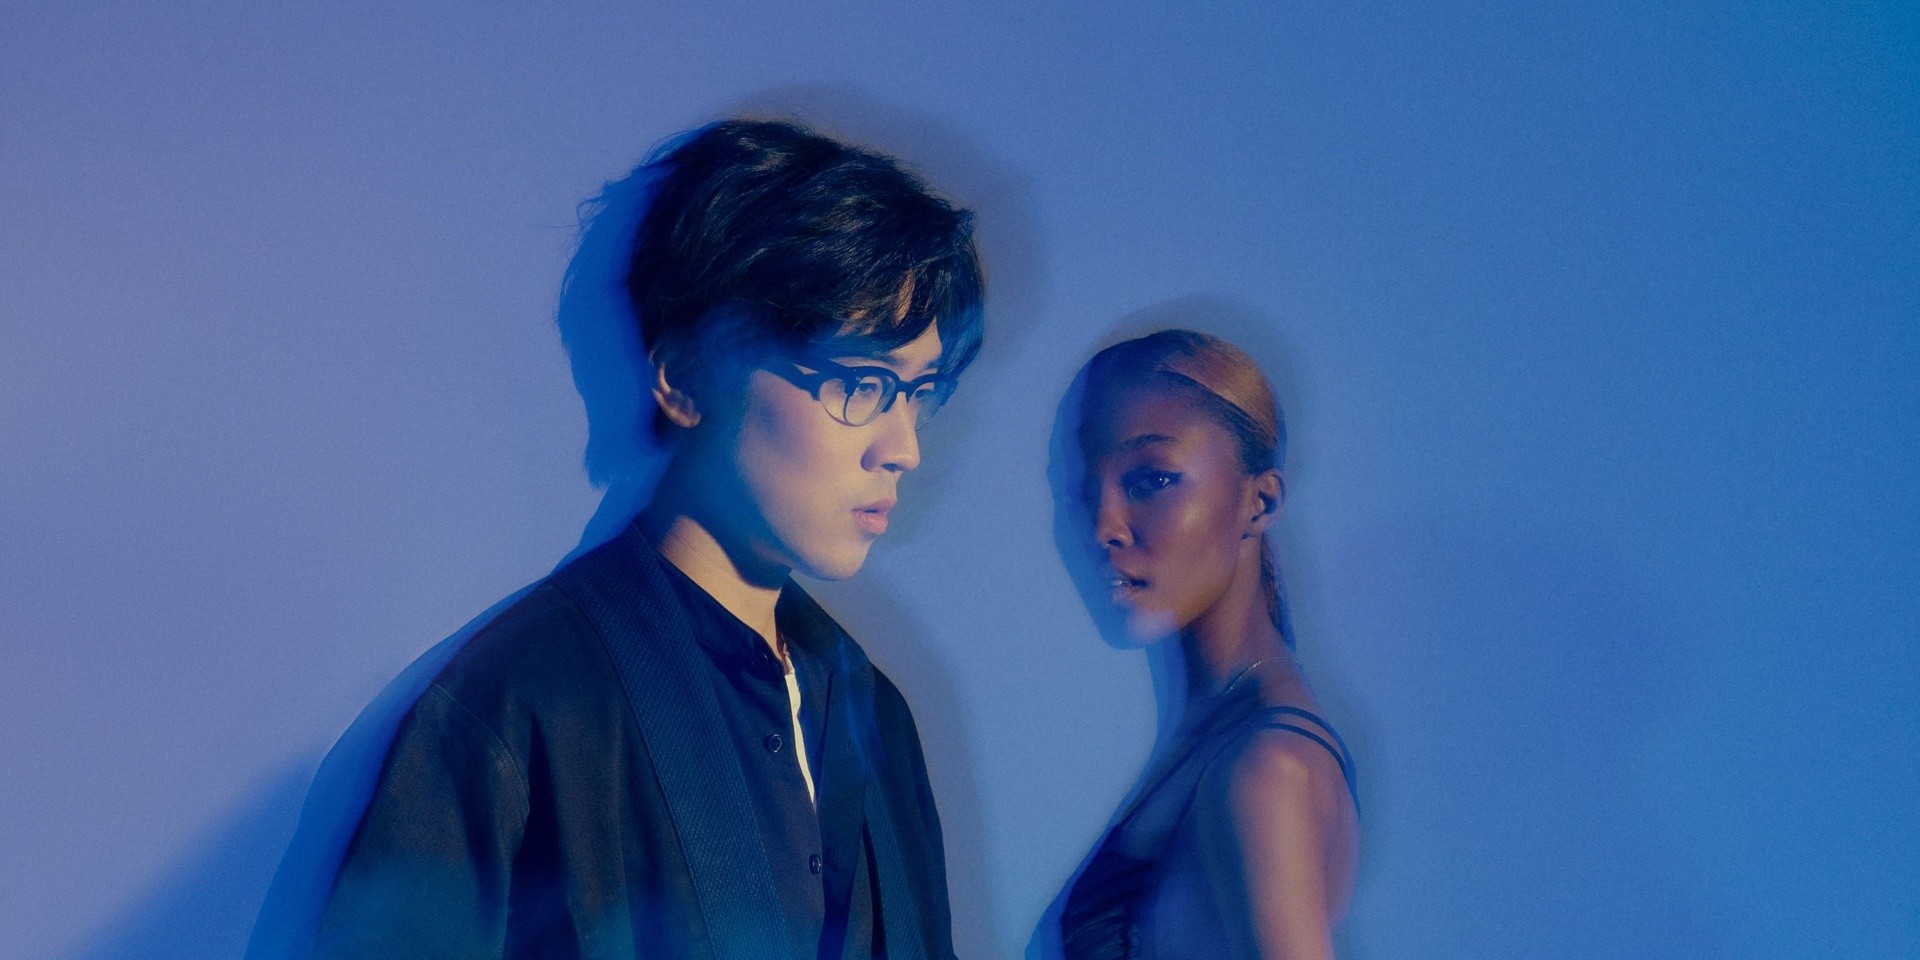 The Great Wave debuts with Charlie Lim and KEYANA intimate duet, 'trade my heart' — listen